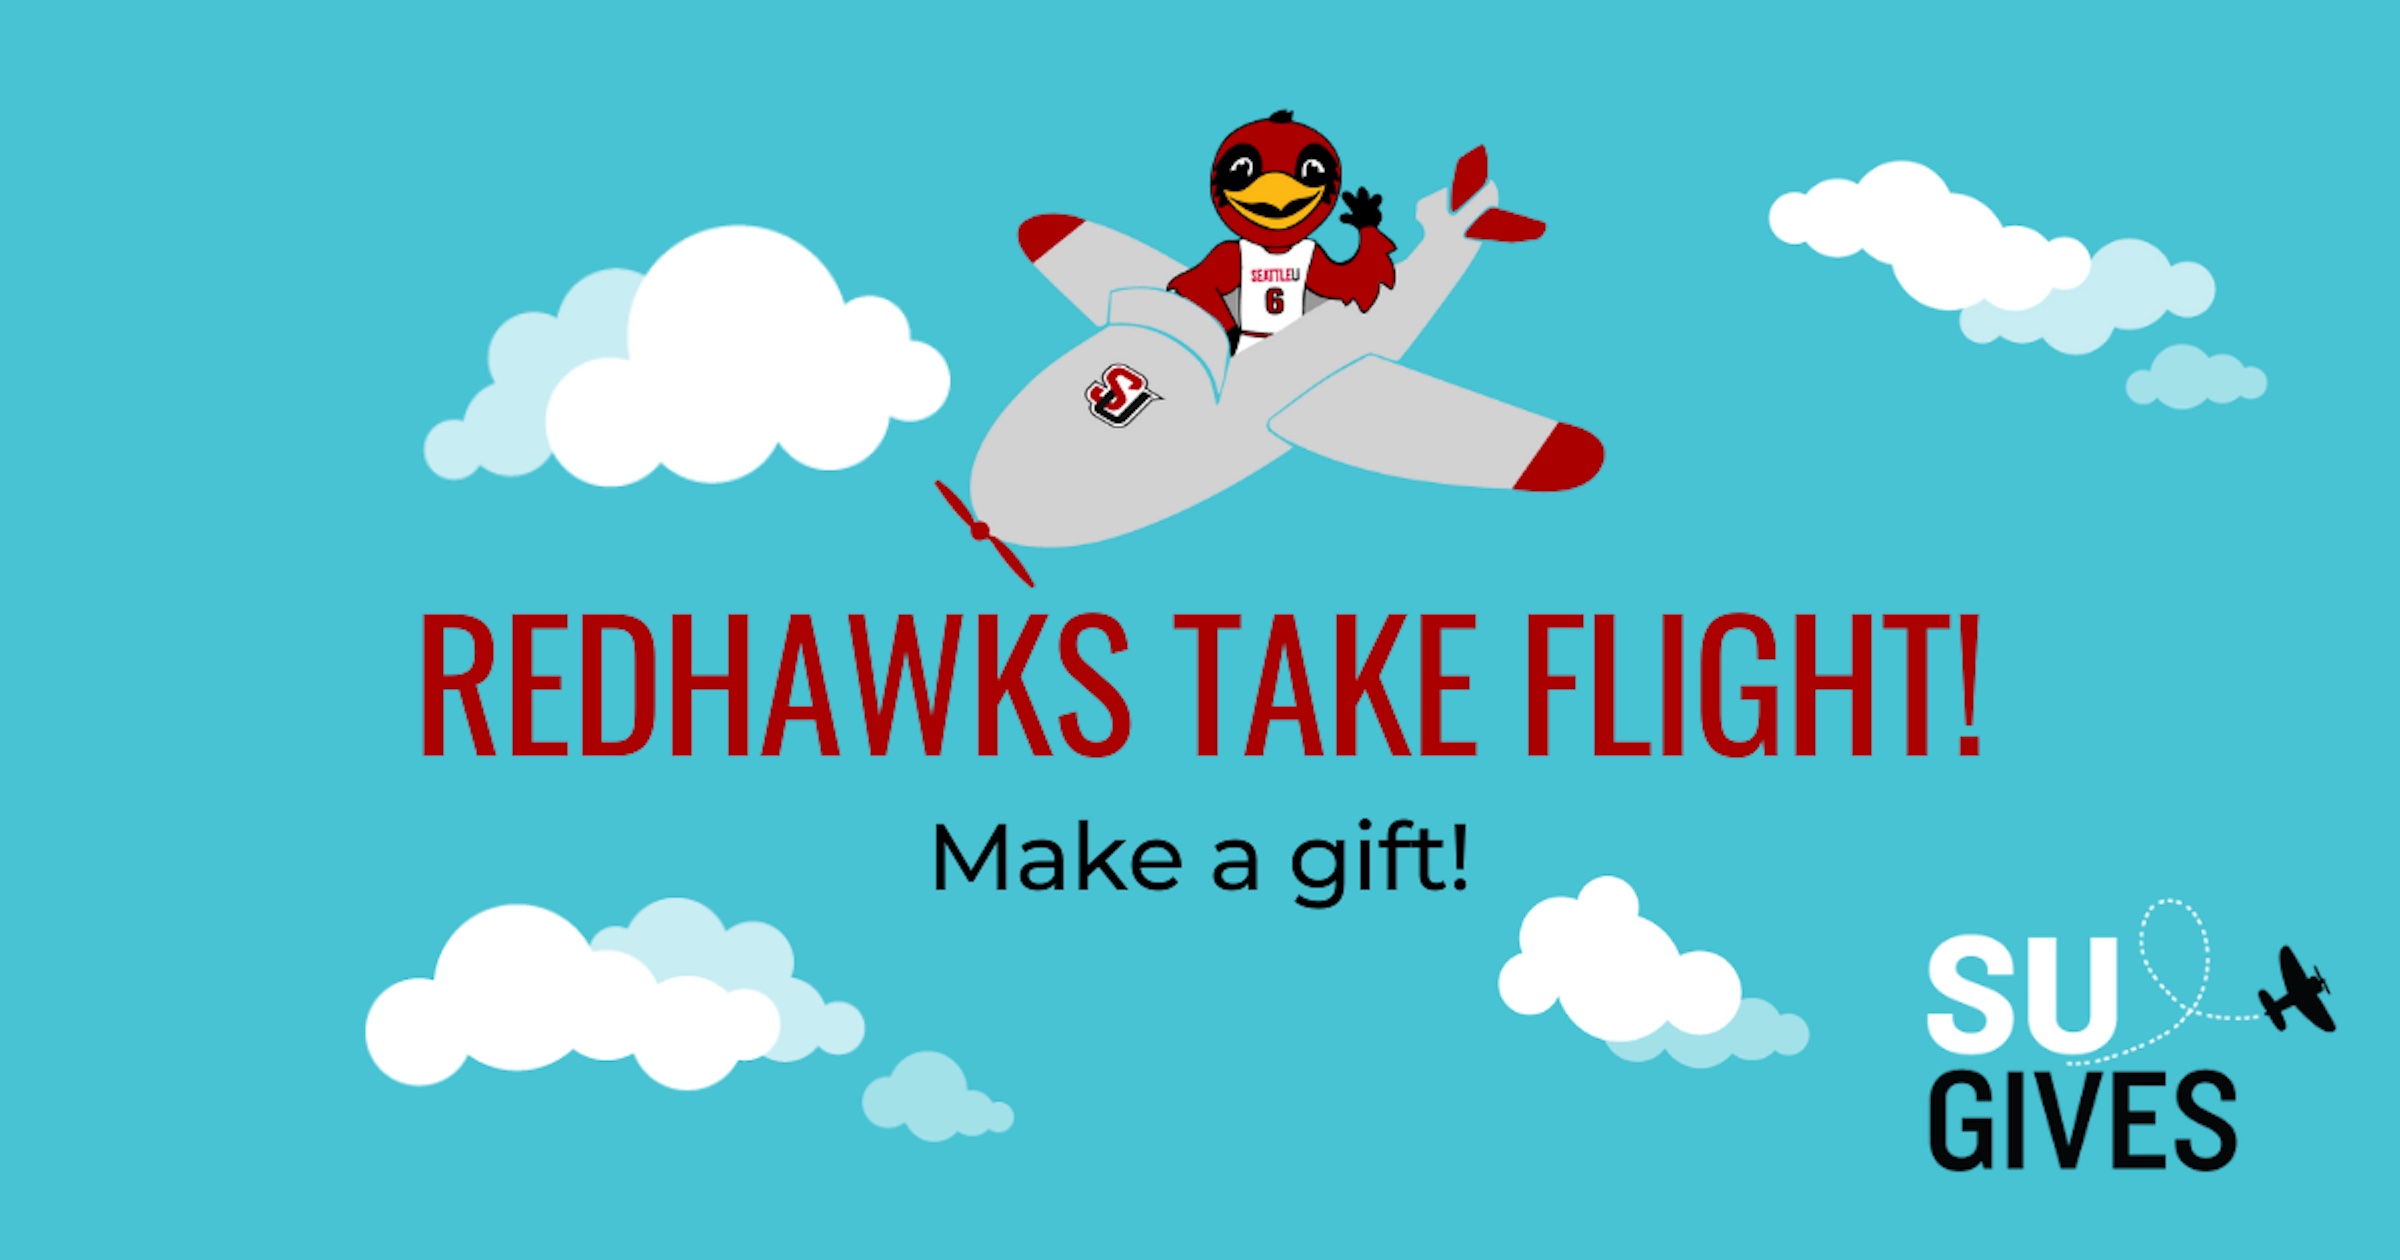 A graphic featuring Rudy the Redhawk flying as part of Seattle U Gives campaign. 